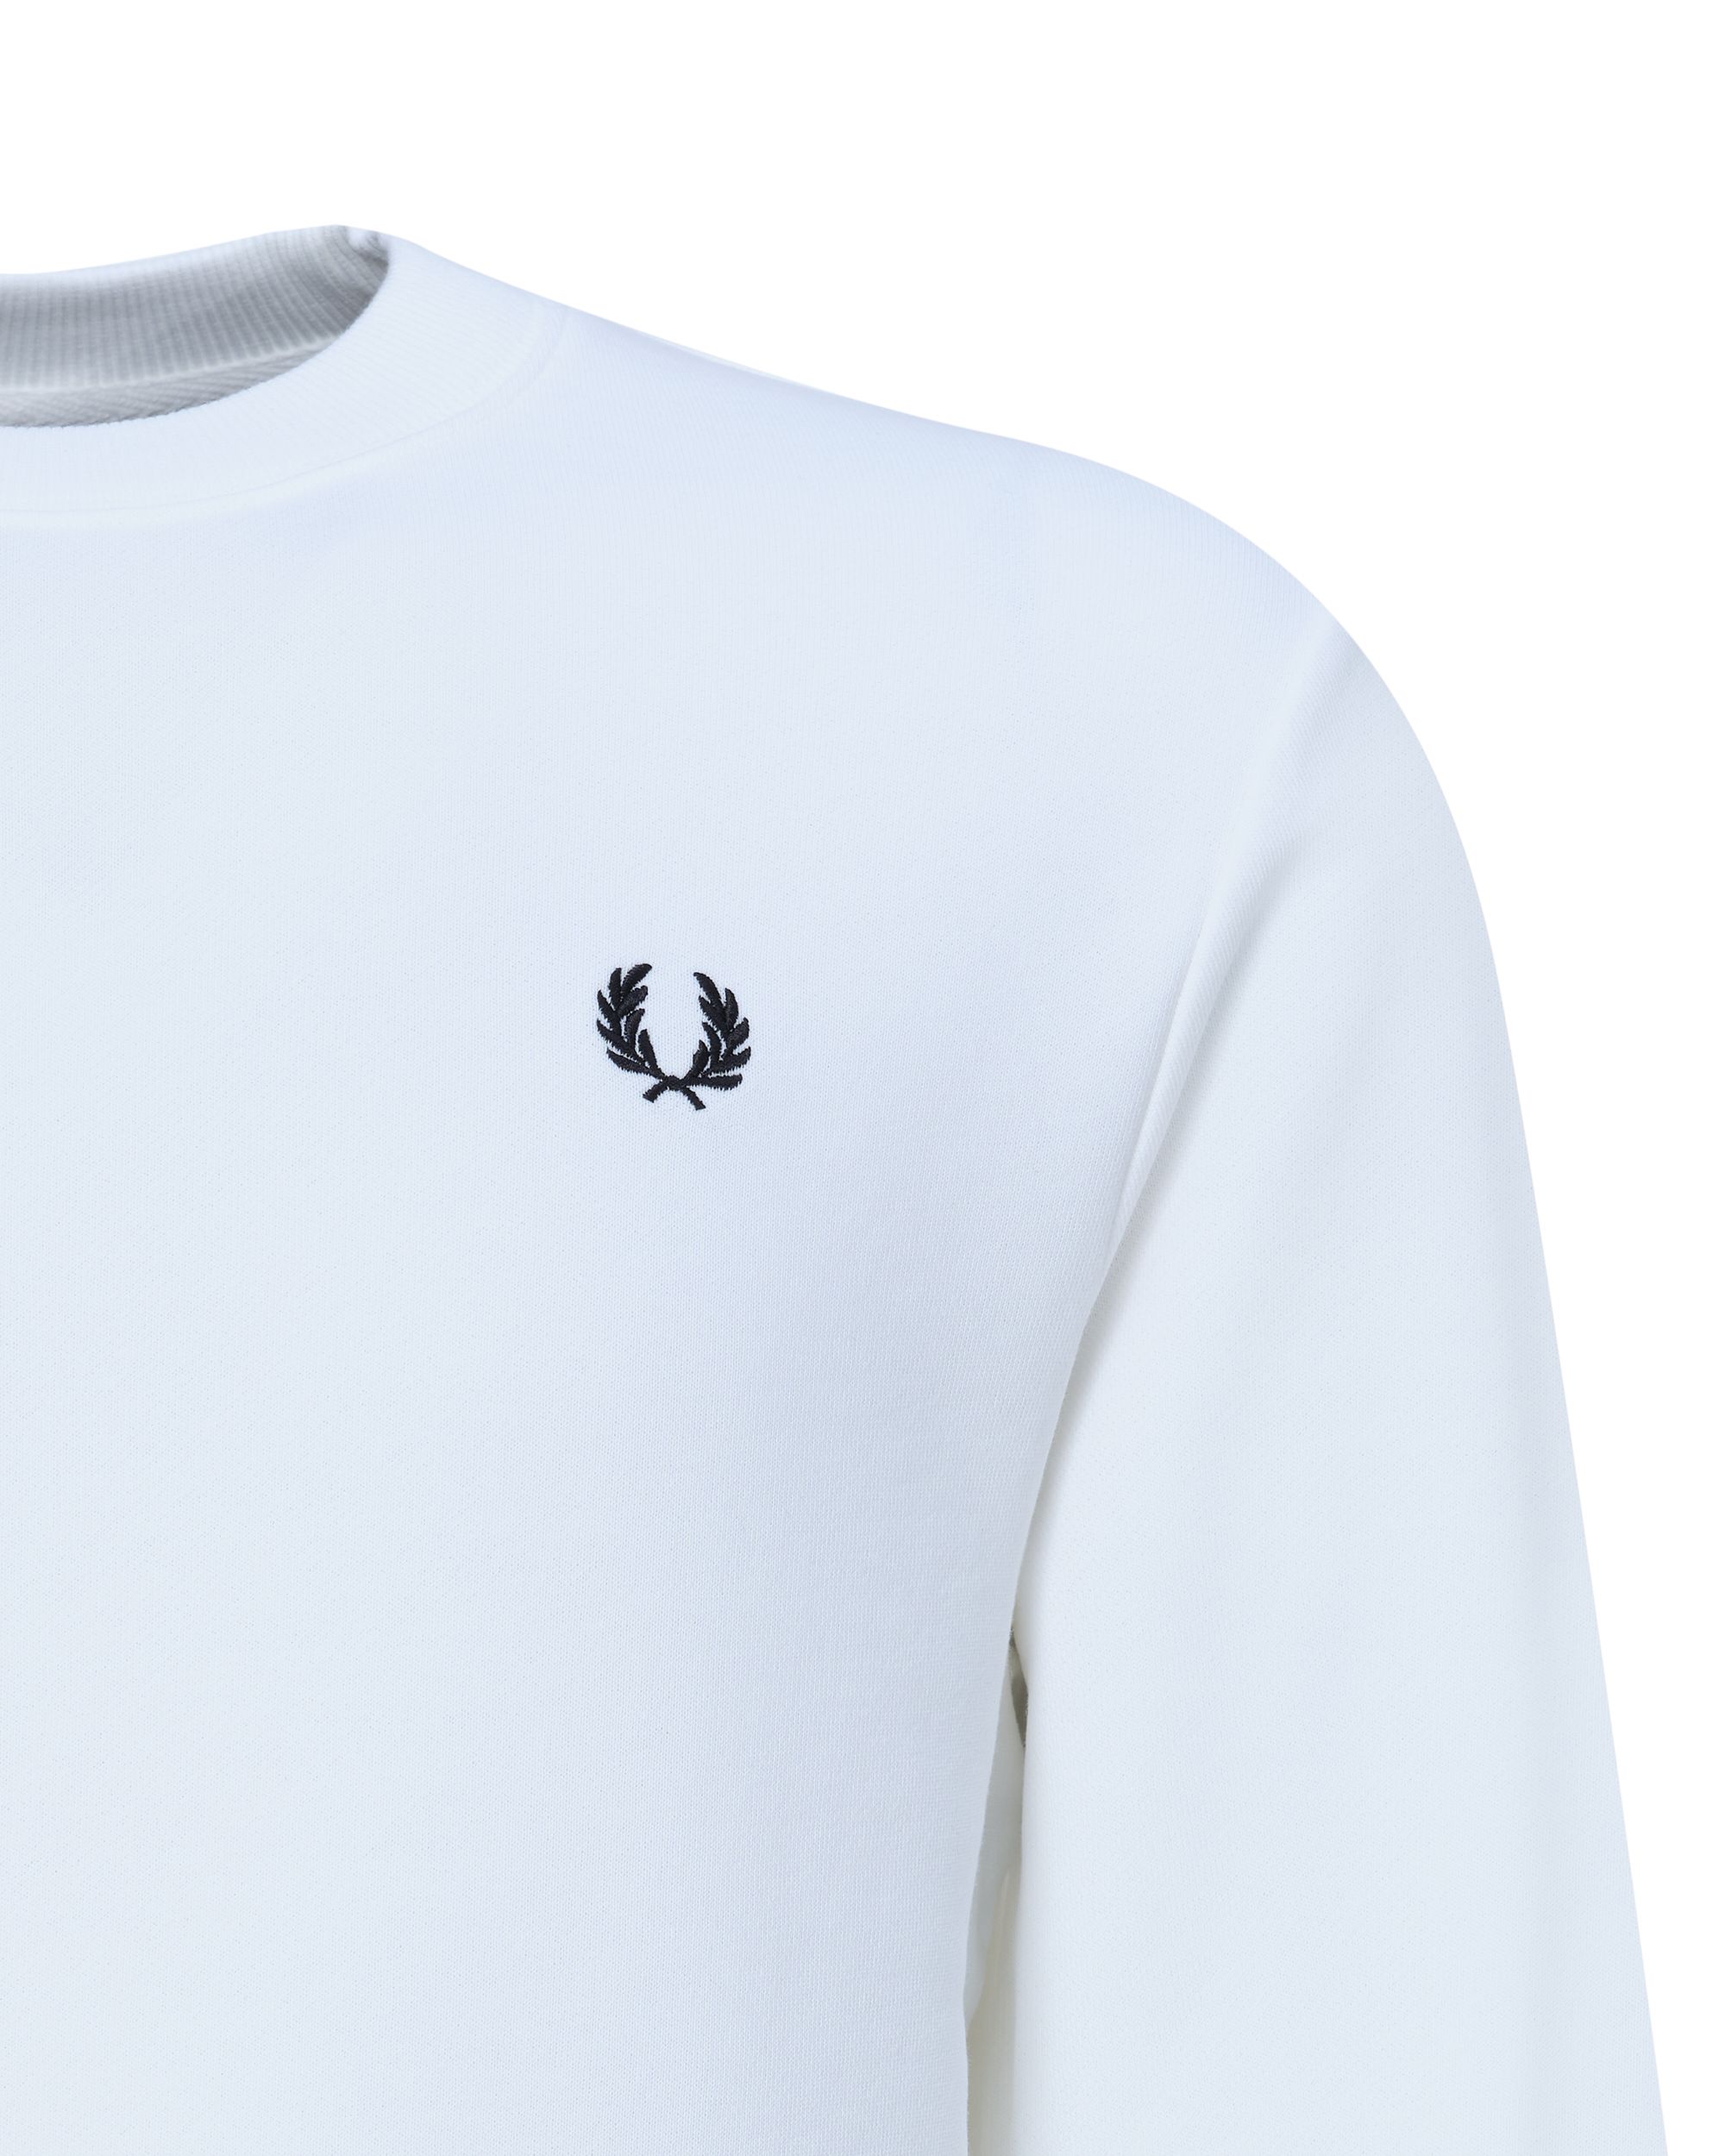 Fred Perry Sweater Wit 078795-001-L